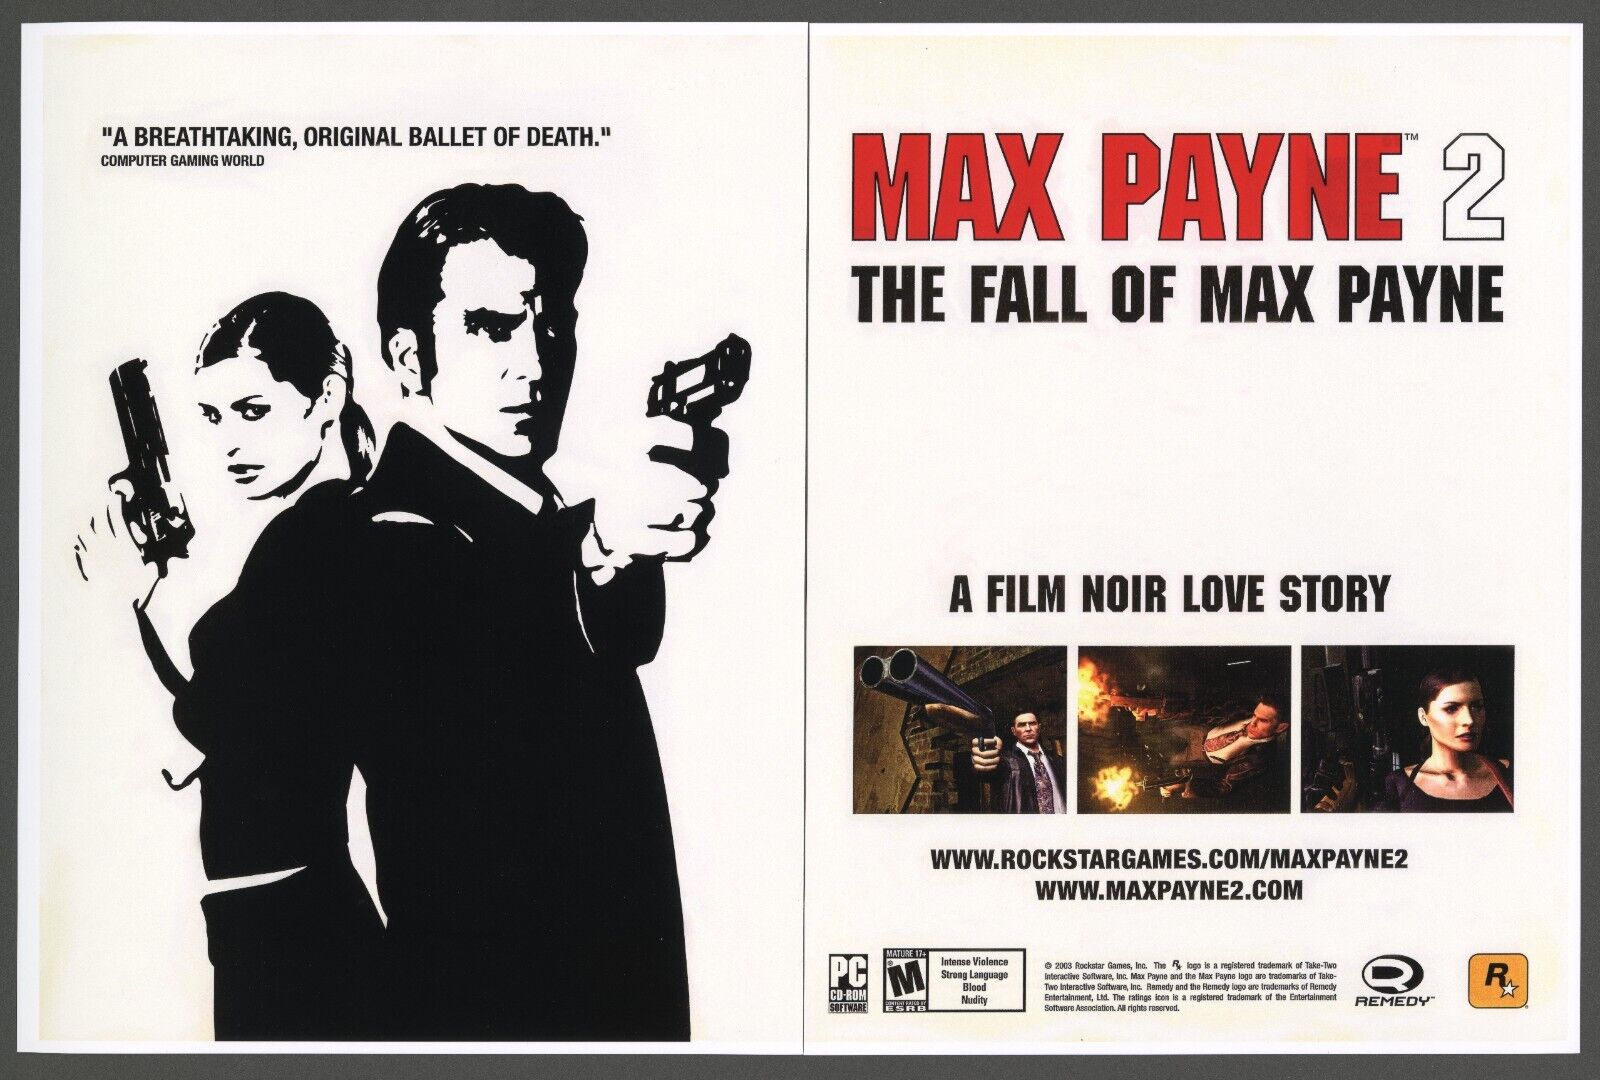 Max Payne 2 The Fall of Max Payne PC Xbox PS2 Game Promo Ad Art Print Poster